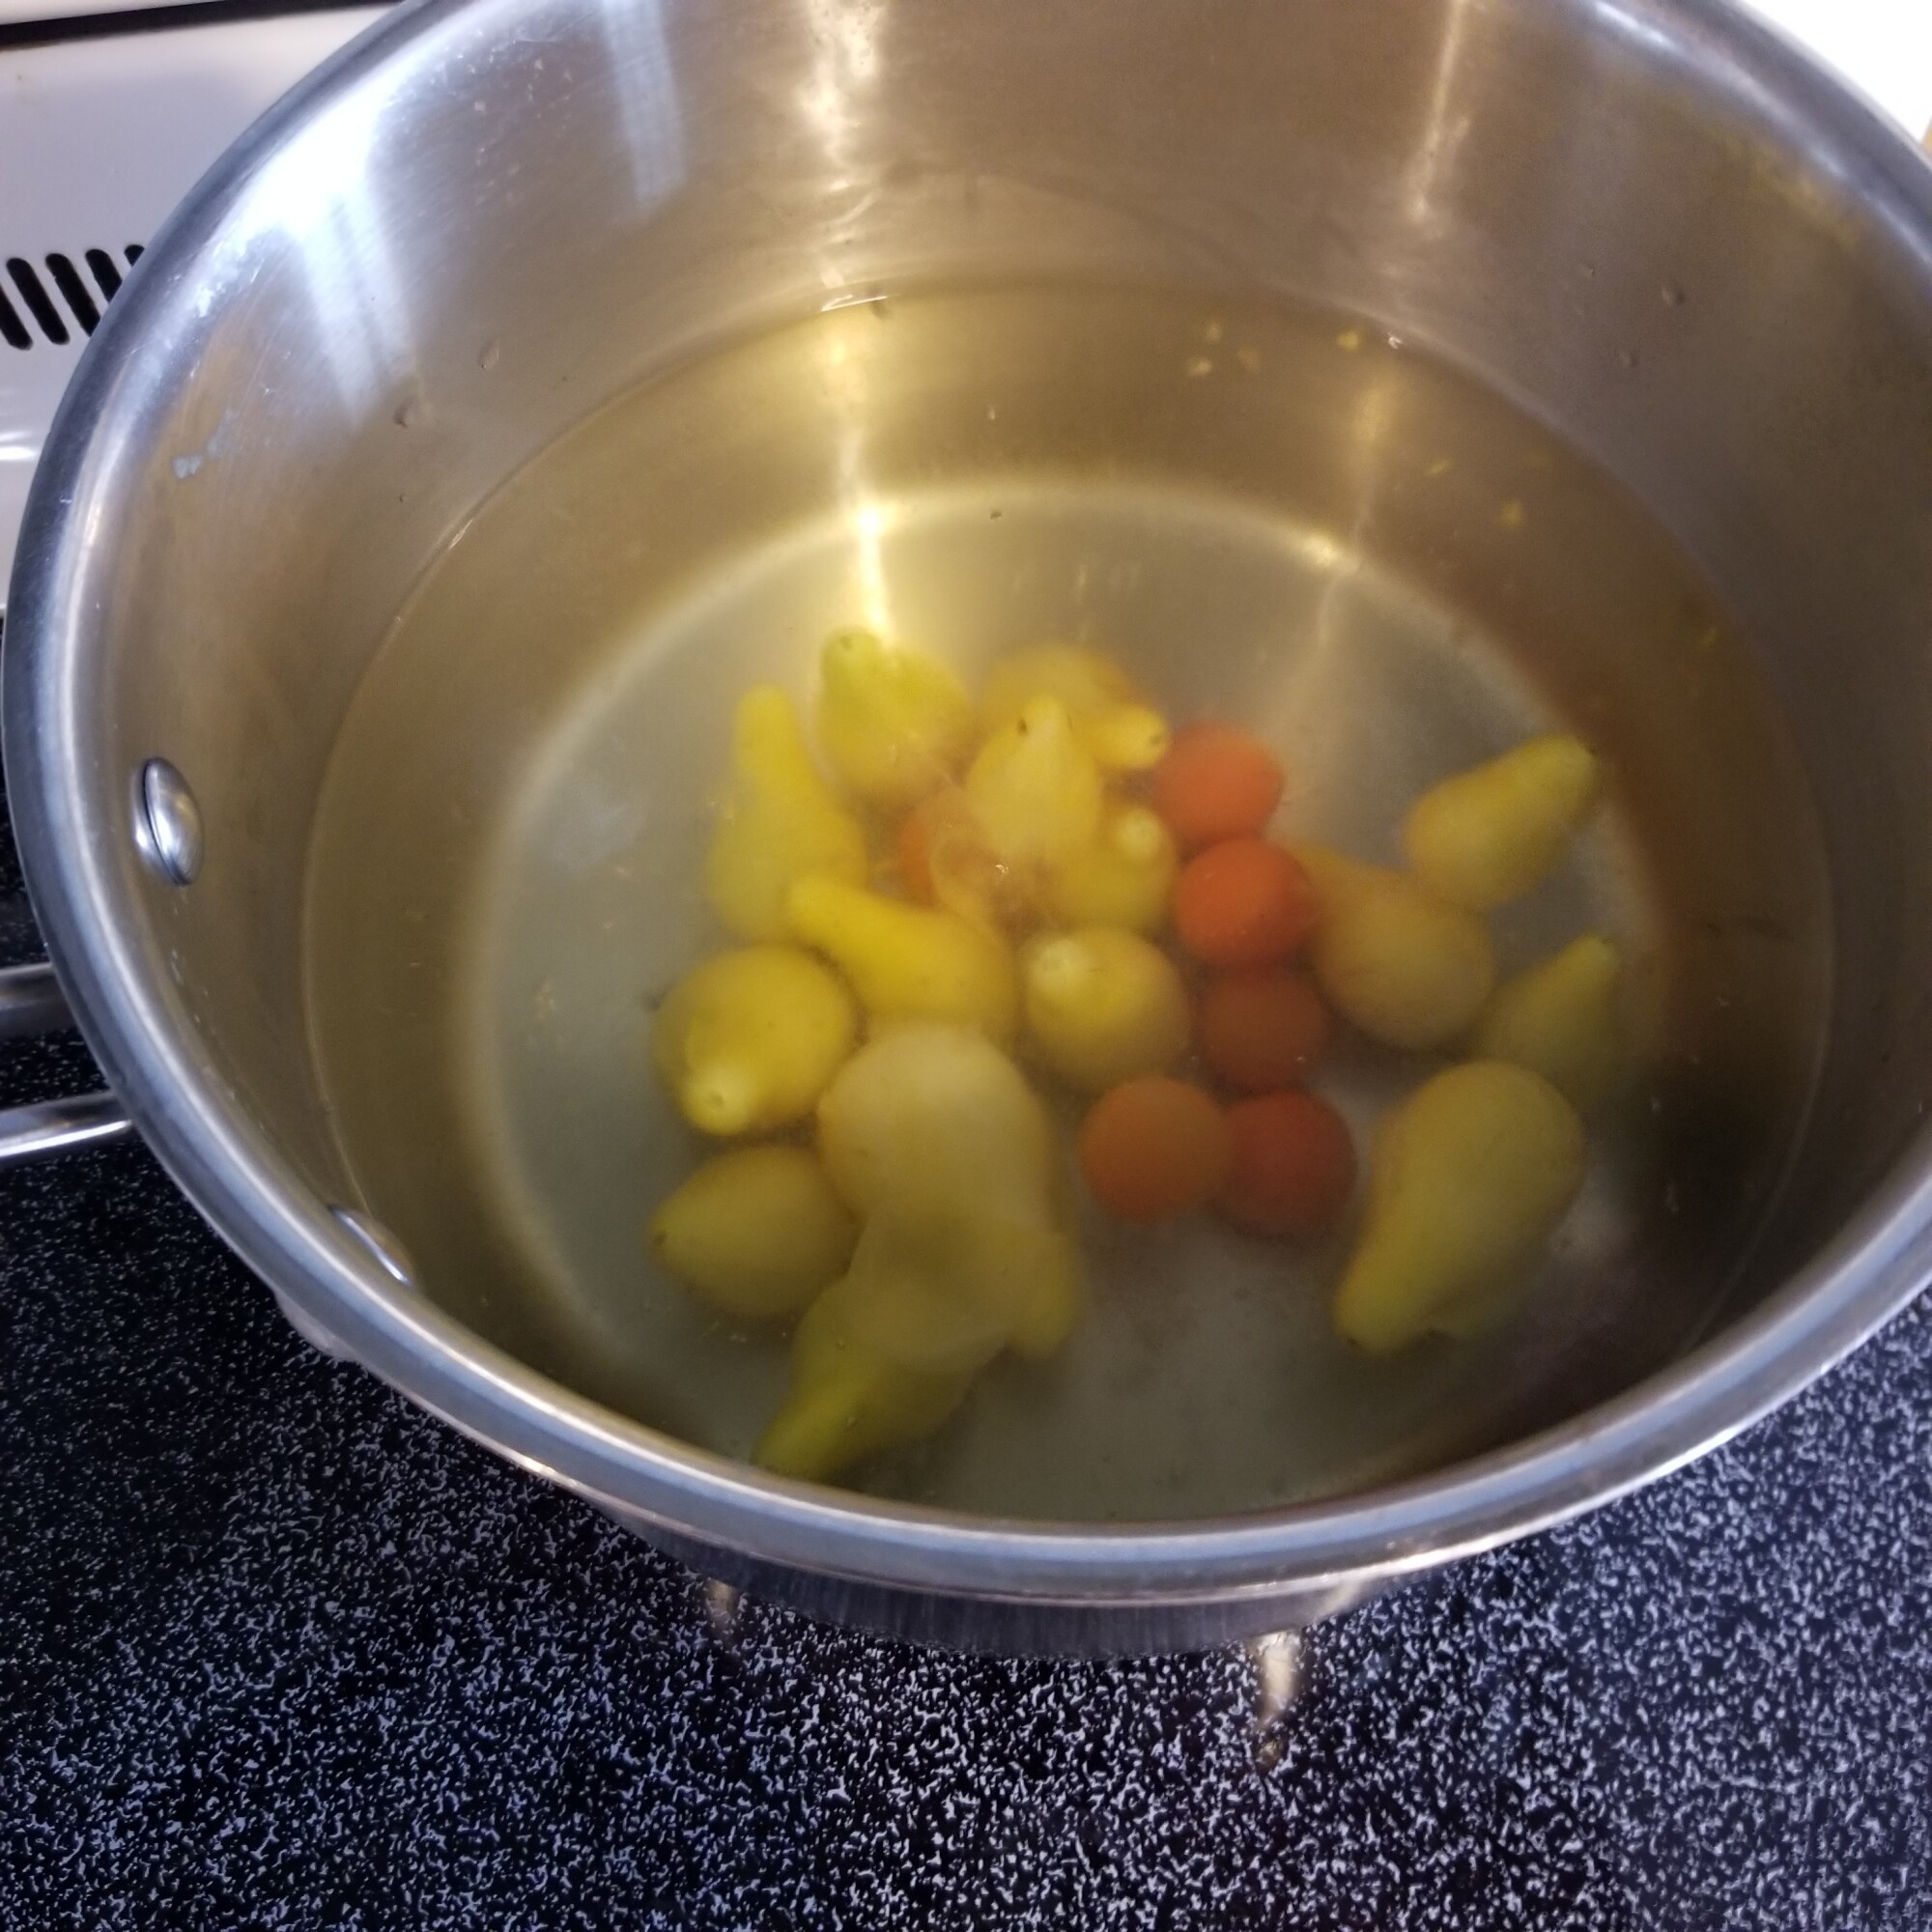 tomatoes in boiling water